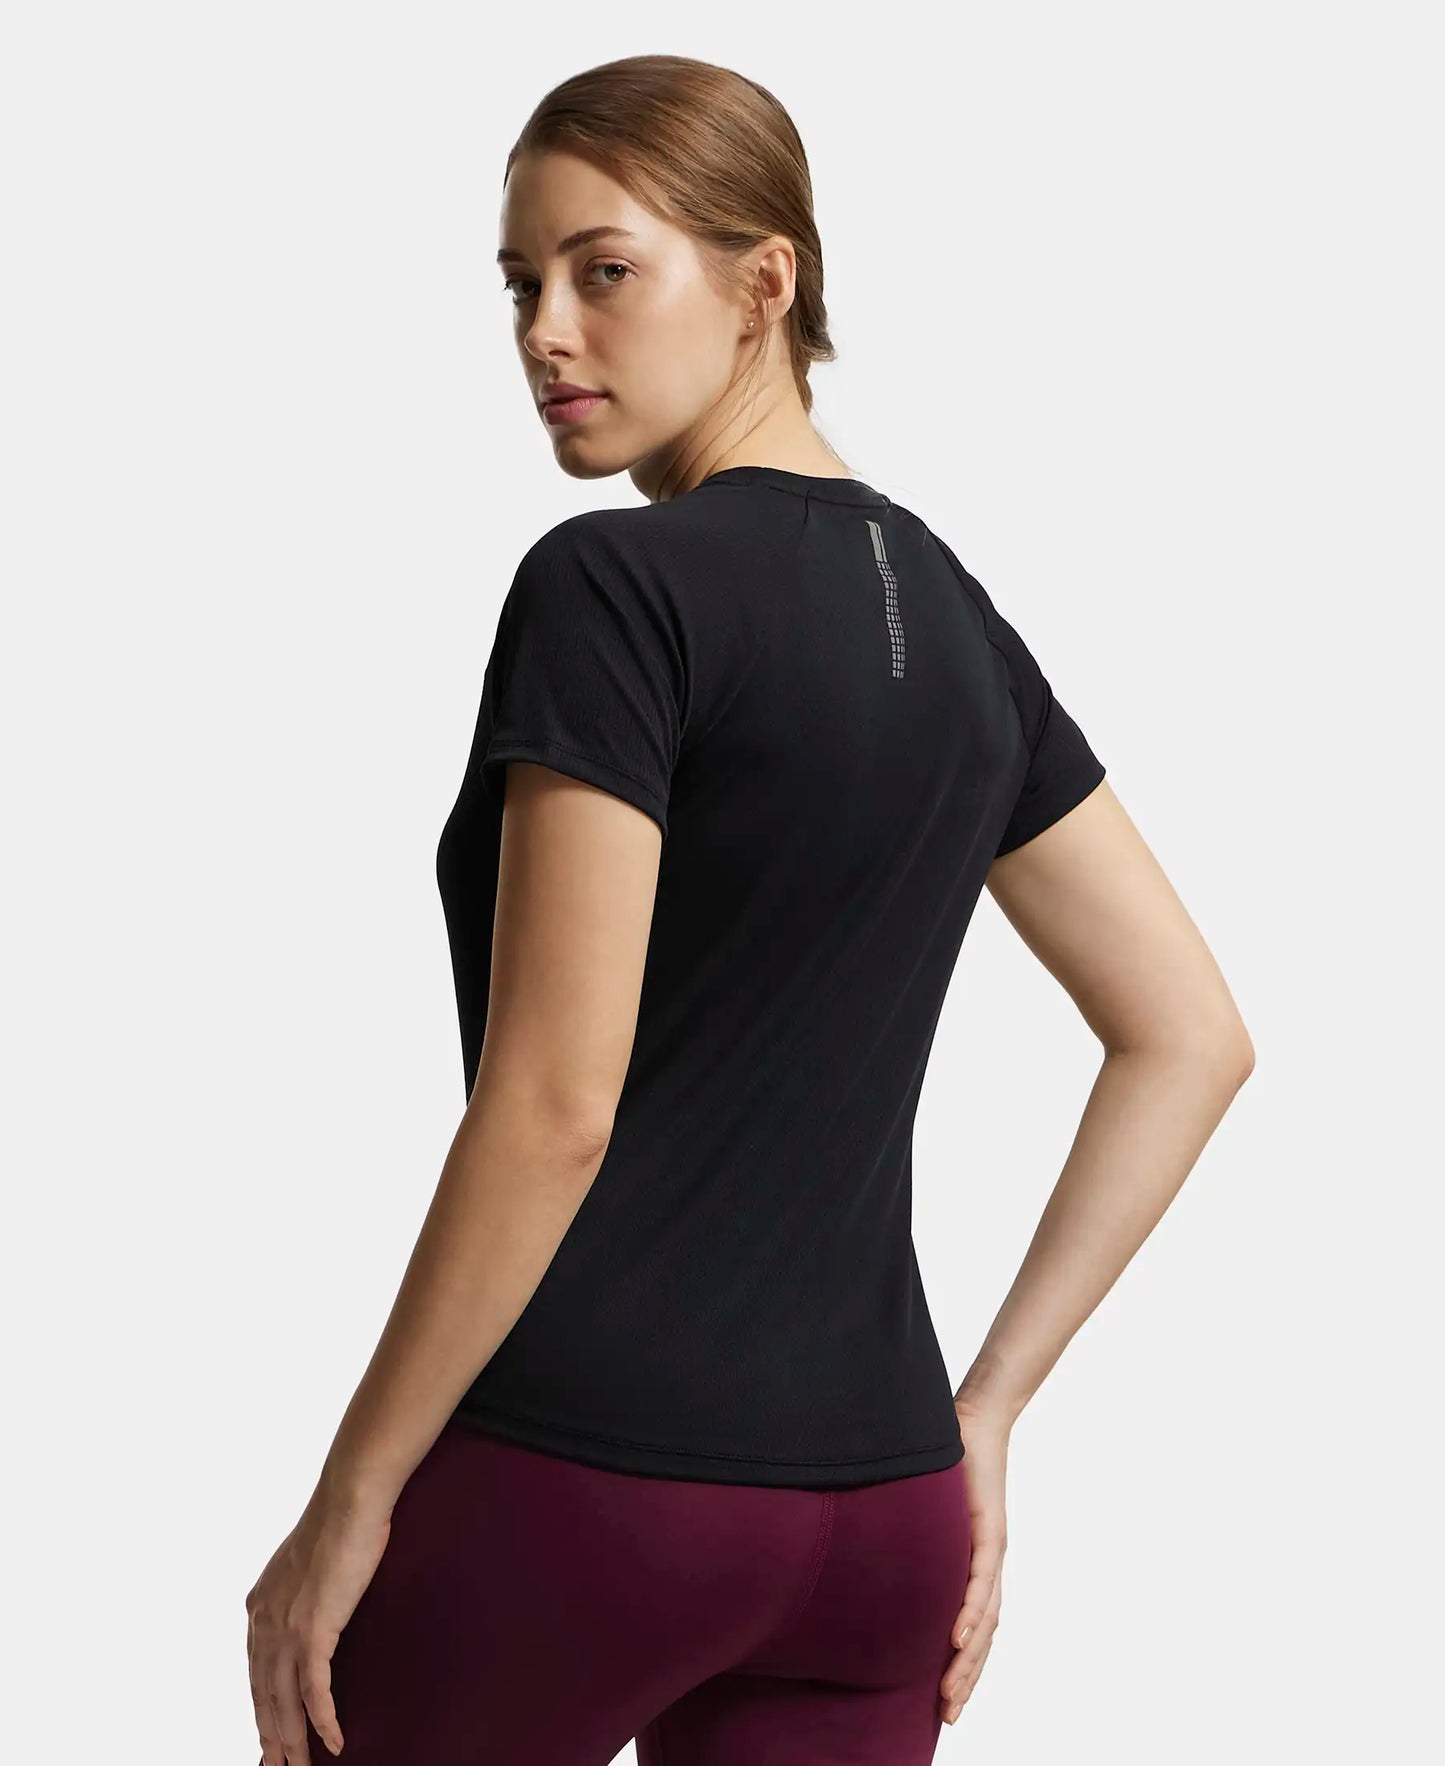 Microfiber Fabric Relaxed Fit Half Sleeve Breathable Mesh T-Shirt - Black-3